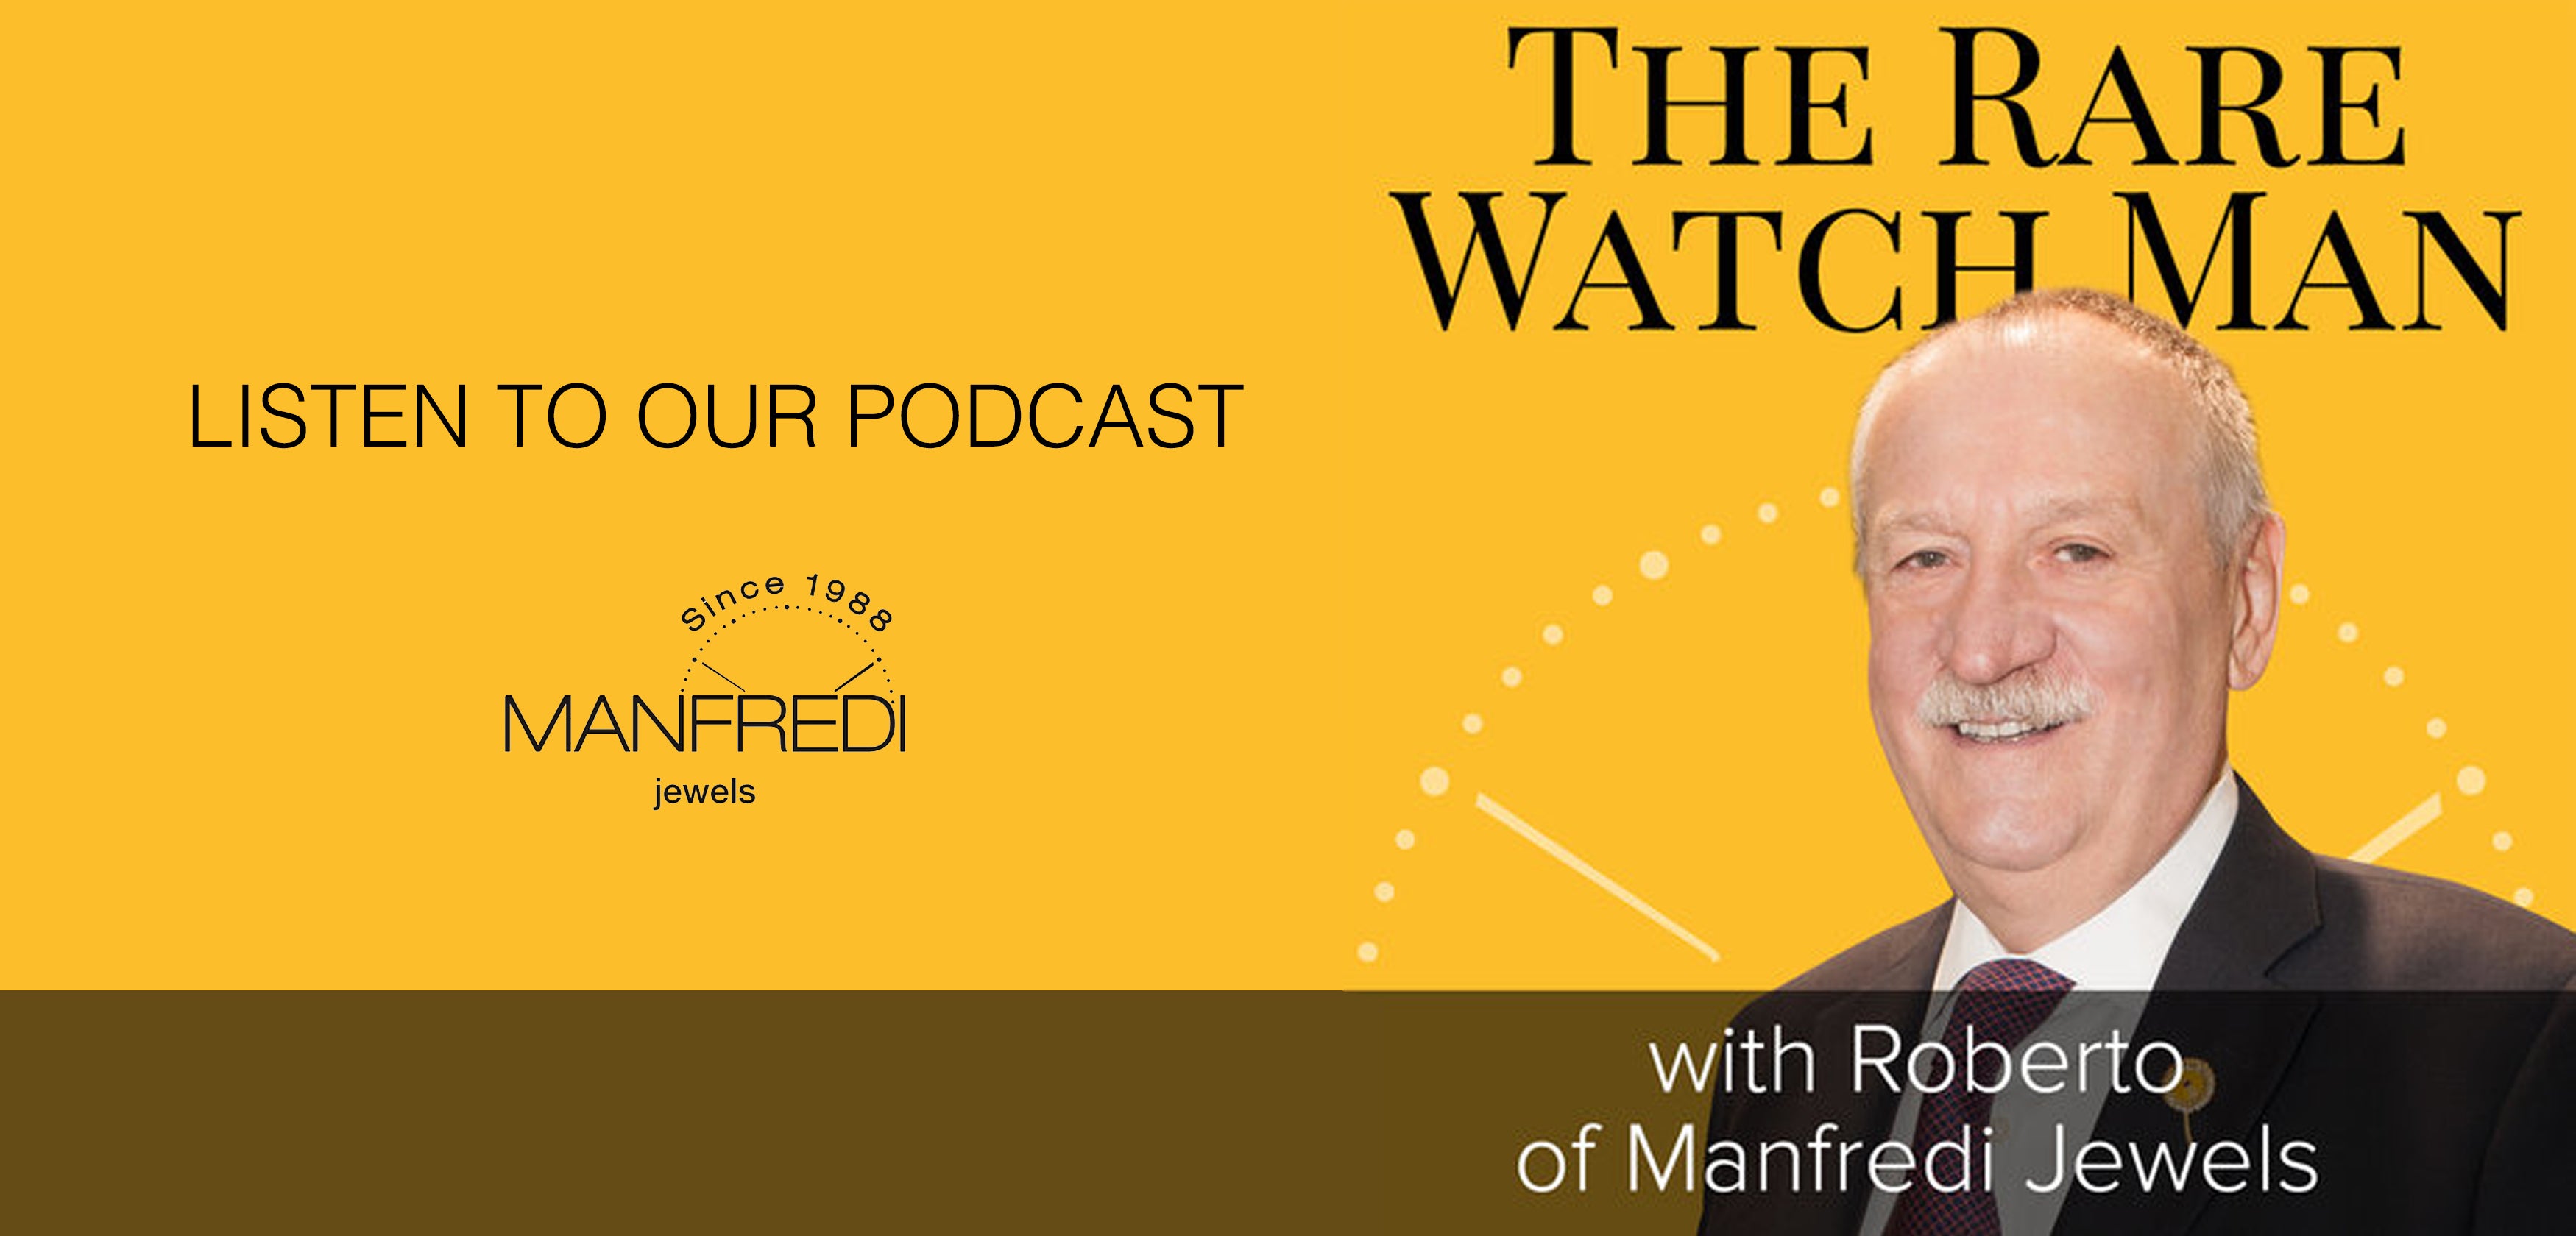 Manfredi Launches ‘The Rare Watch Man’ Podcast Series